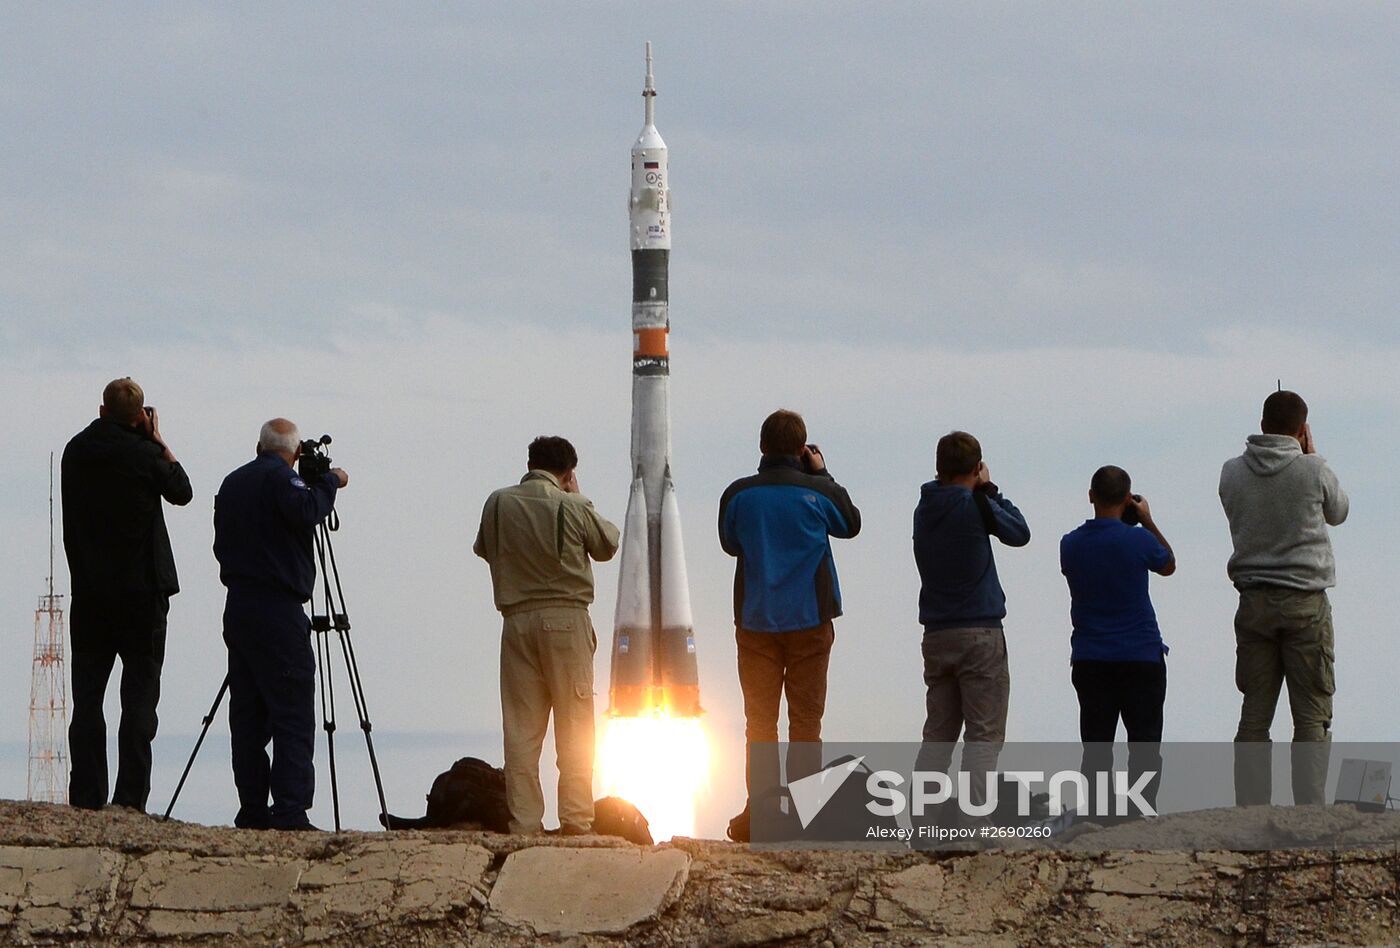 Soyuz TMA-18M launches to ISS with long-duration expedition 45/46